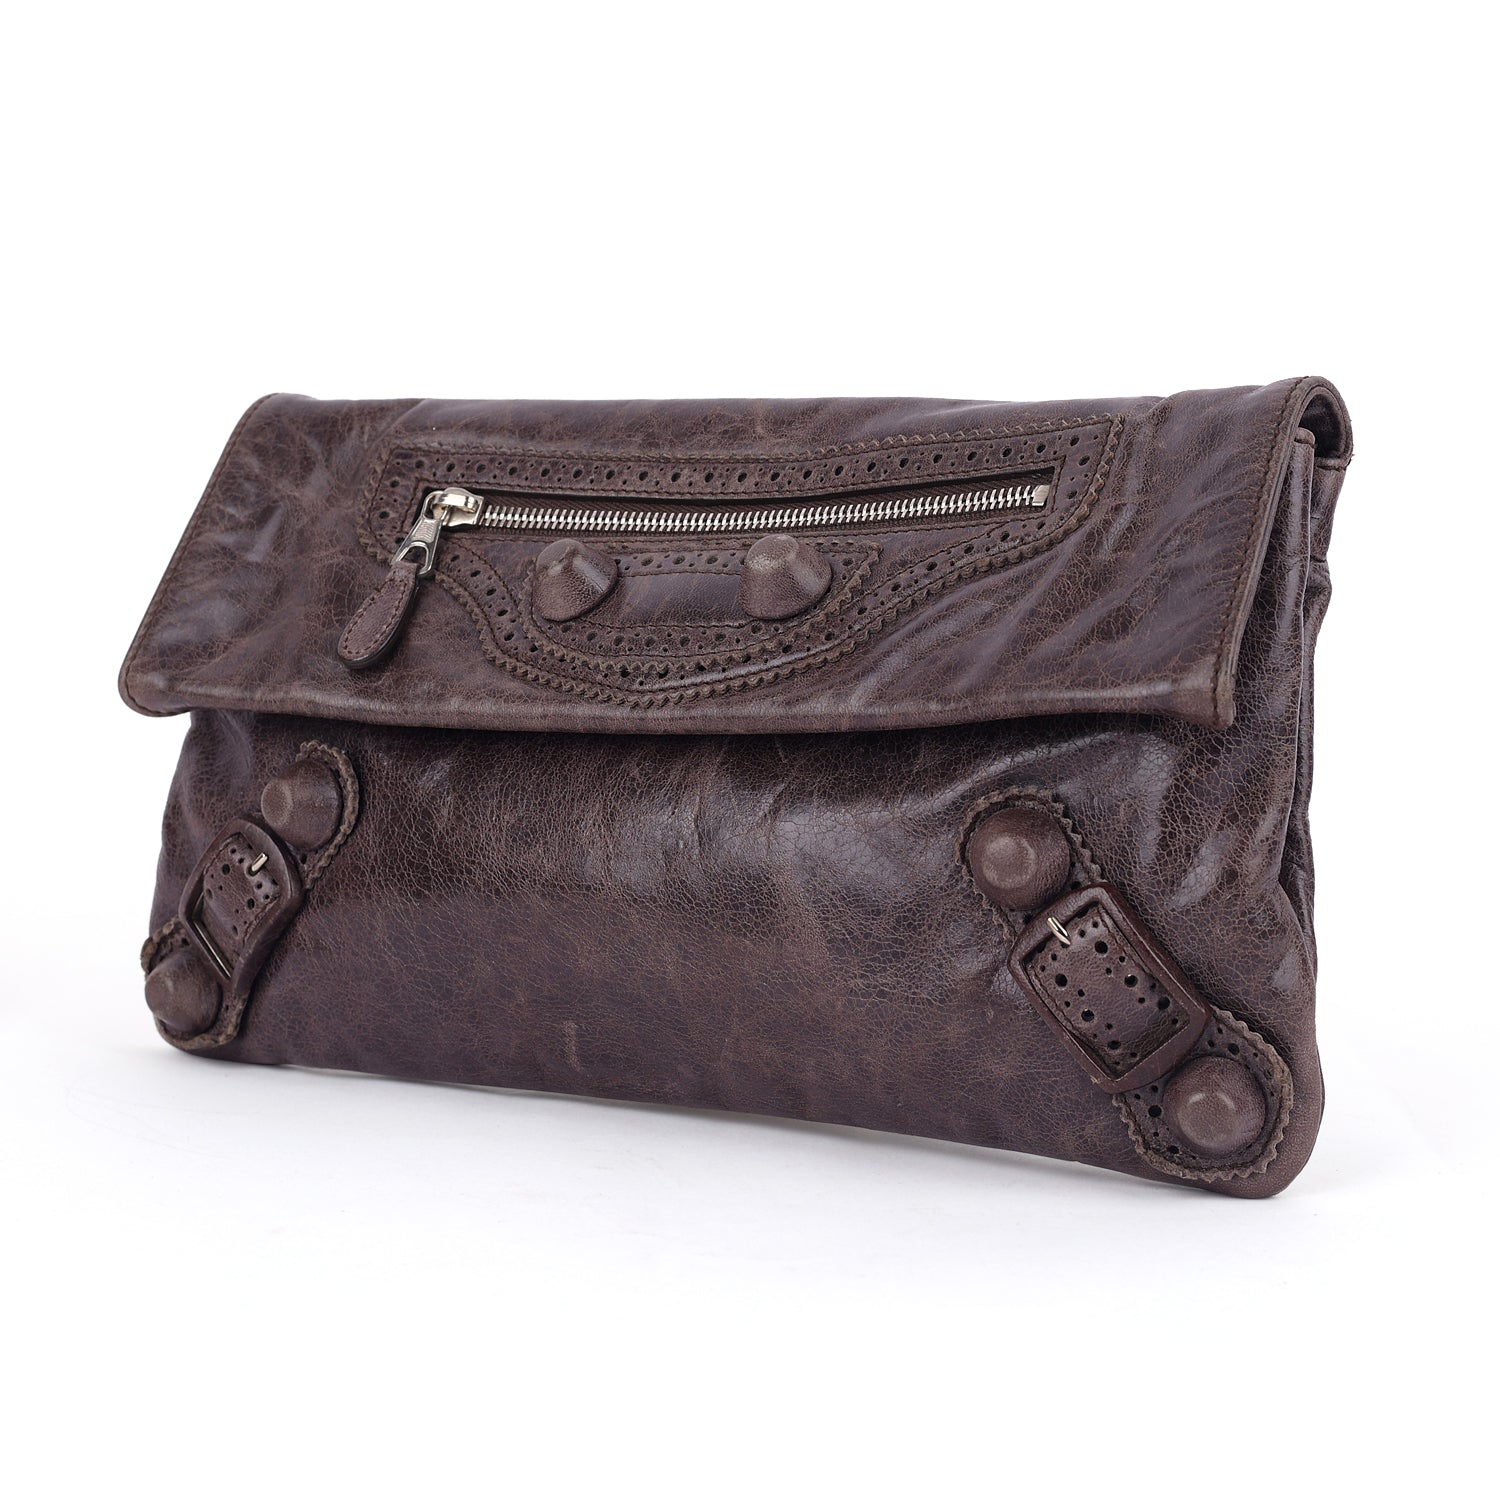 Murier Leather Giant Envelope Clutch